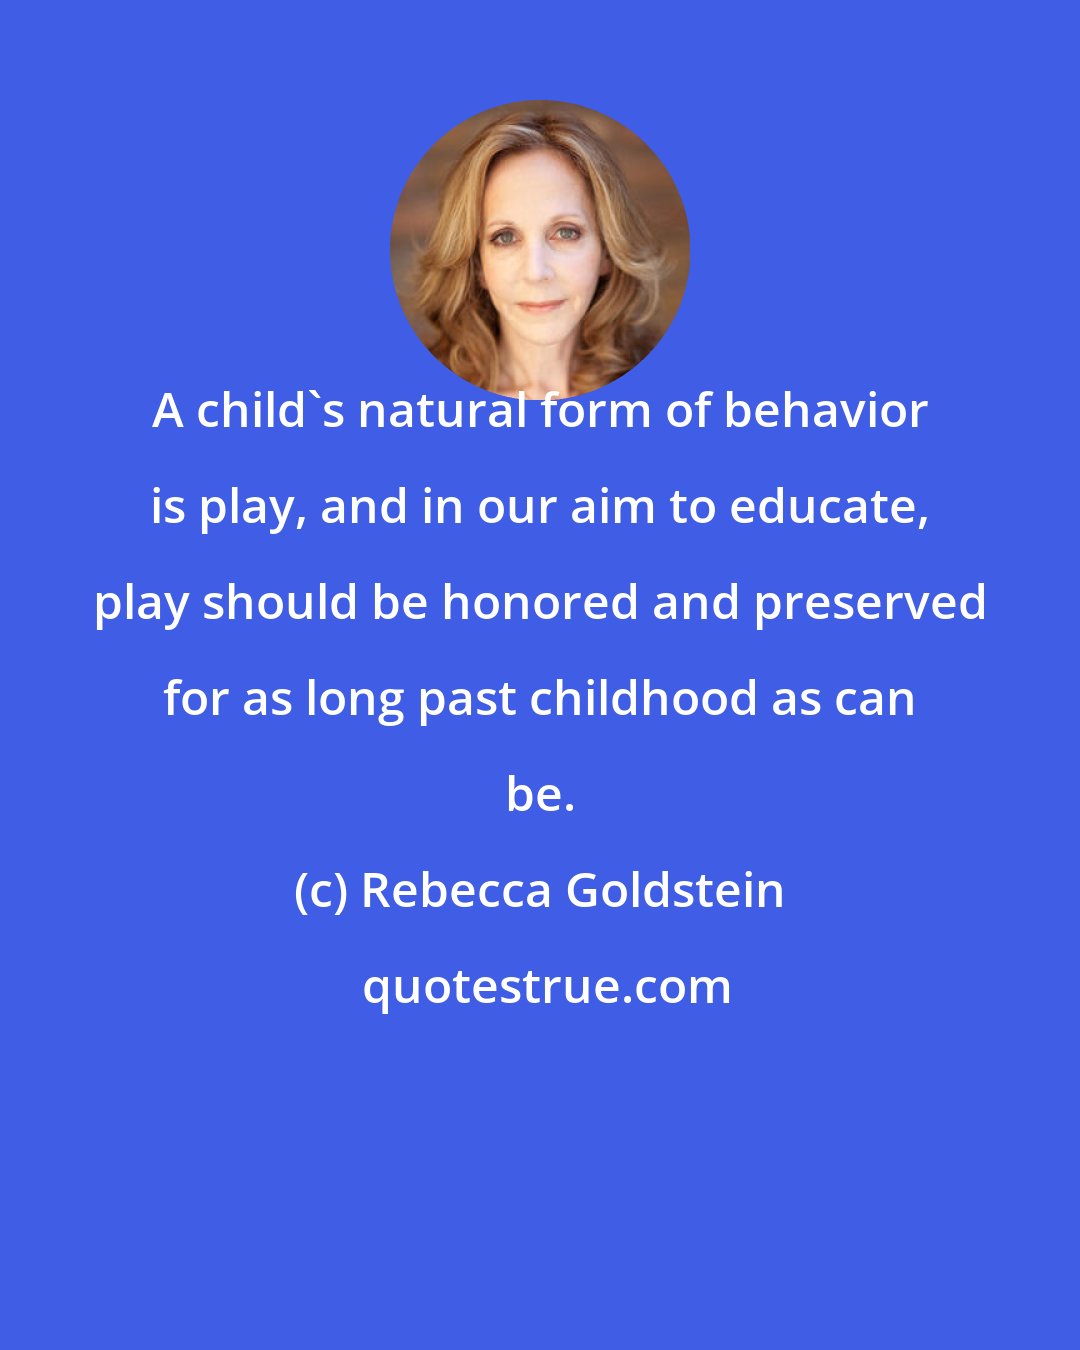 Rebecca Goldstein: A child's natural form of behavior is play, and in our aim to educate, play should be honored and preserved for as long past childhood as can be.